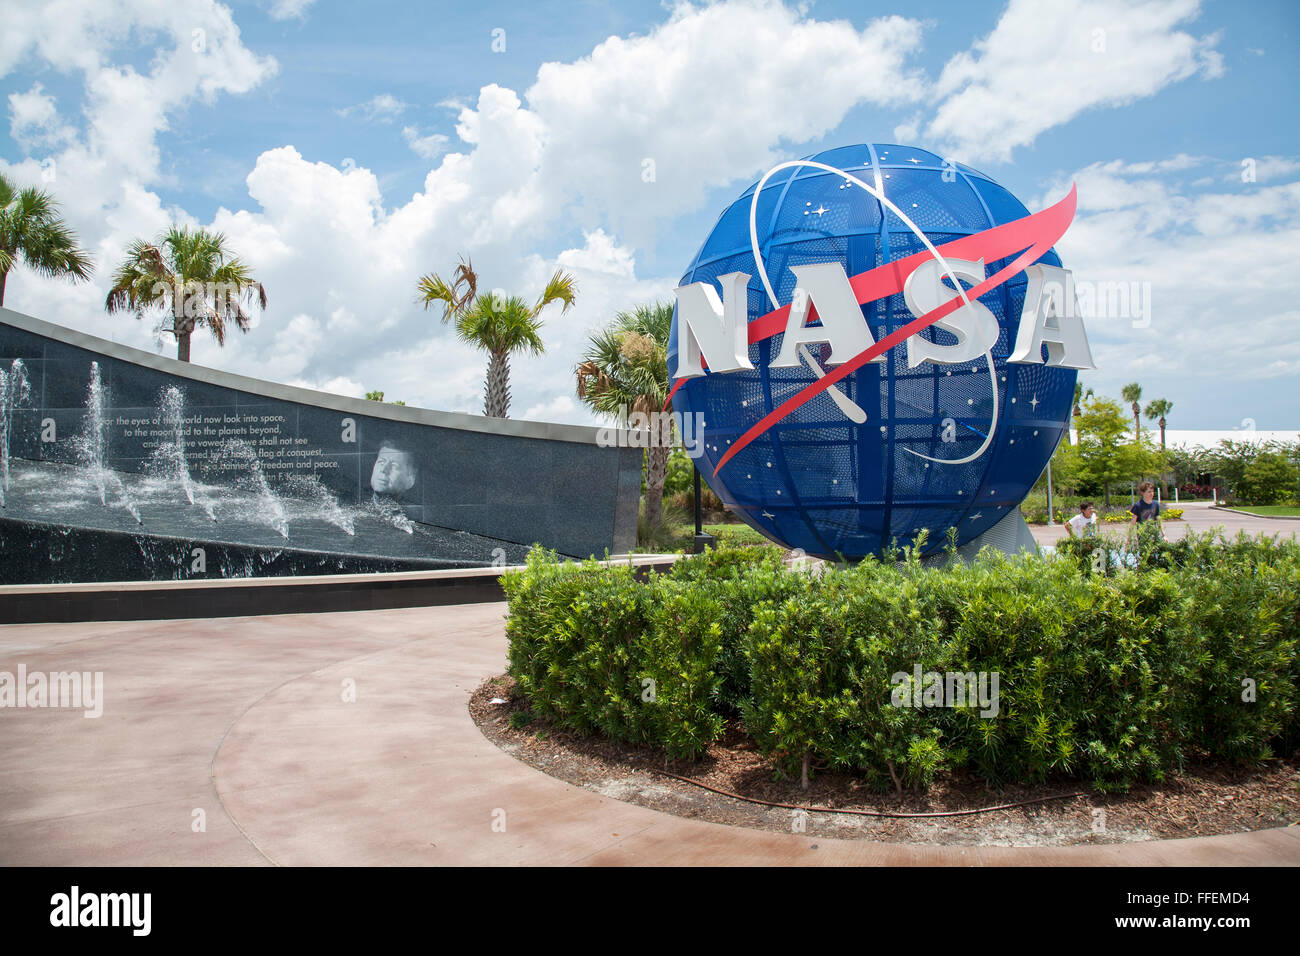 NASA logo and JFK quote outside of Kennedy Space Center, Florida, USA Stock Photo